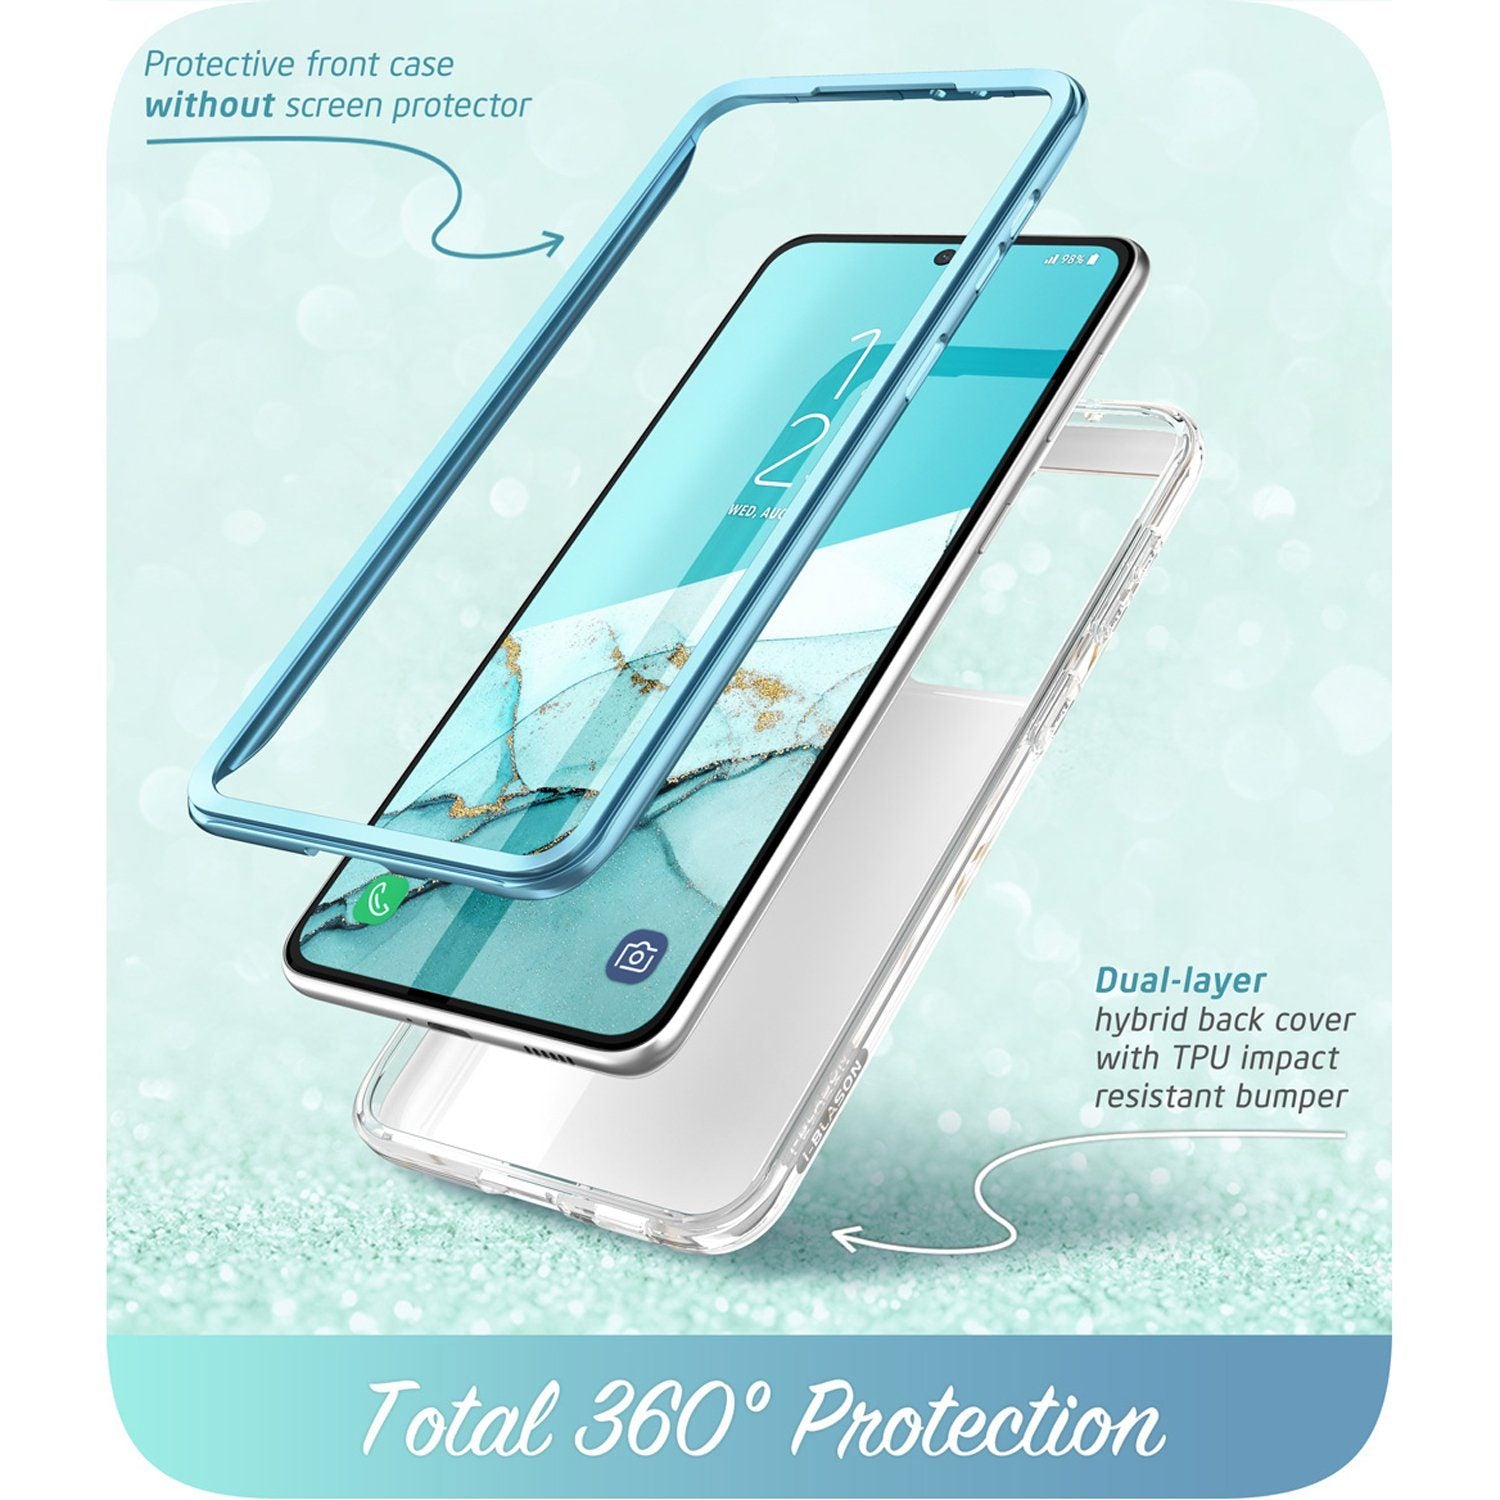 i-Blason Cosmo Series Case for Samsung Galaxy S21 Ultra(Without Screen Protector), Ocean S21 i-Blason 